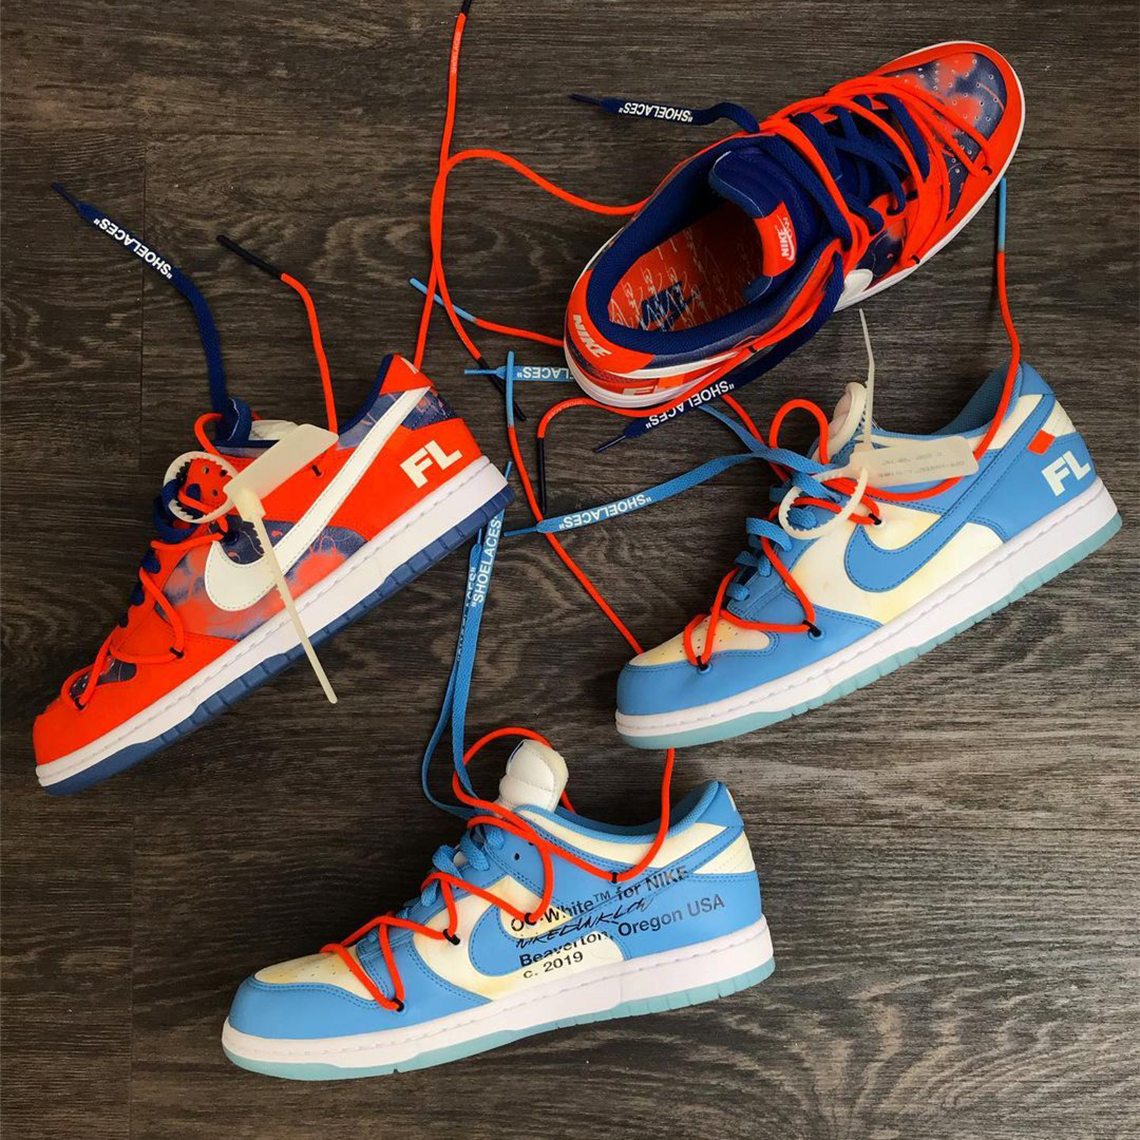 Off White Nike 2021 Release Dates 1